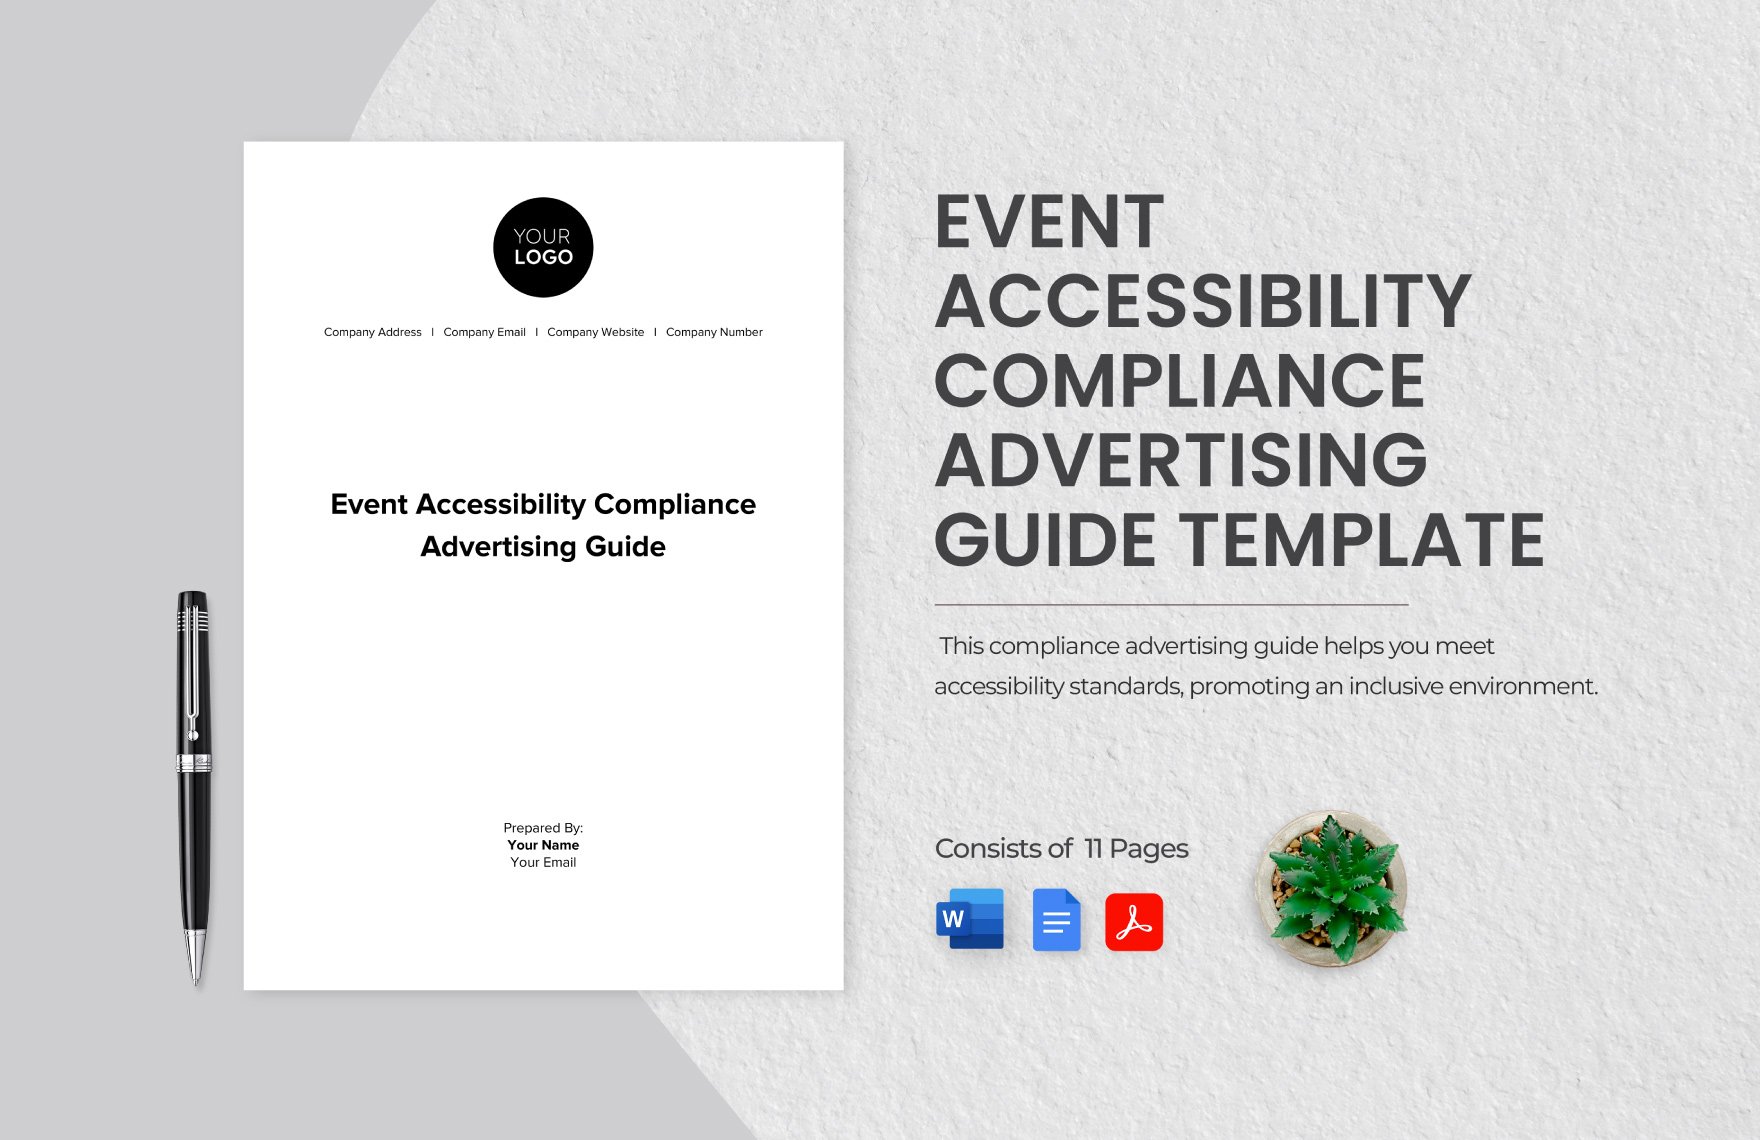 Free Event Accessibility Compliance Advertising Guide Template in Word, Google Docs, PDF, PowerPoint